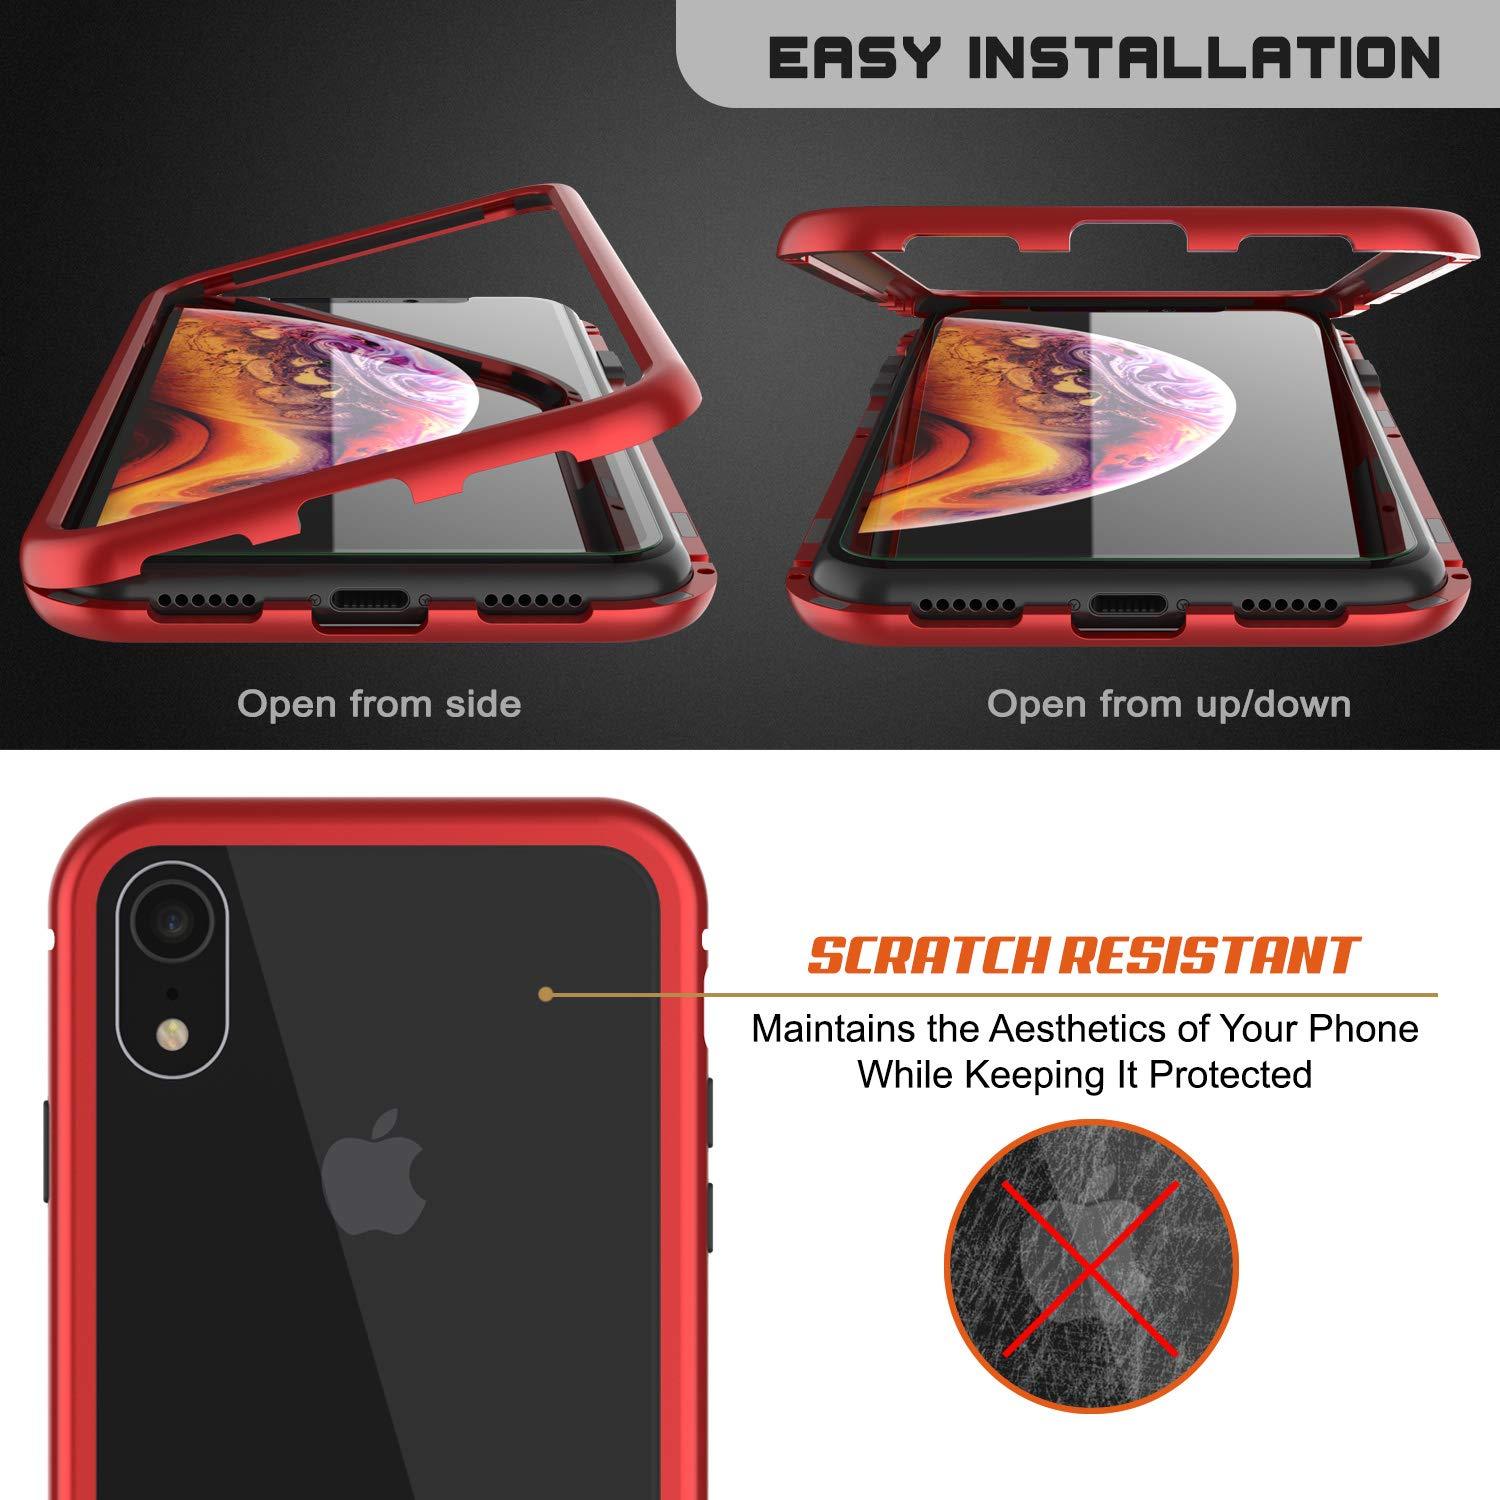 iPhone XR Case, Punkcase Magnetic Shield Protective TPU Cover W/ Tempered Glass Screen Protector [Red]